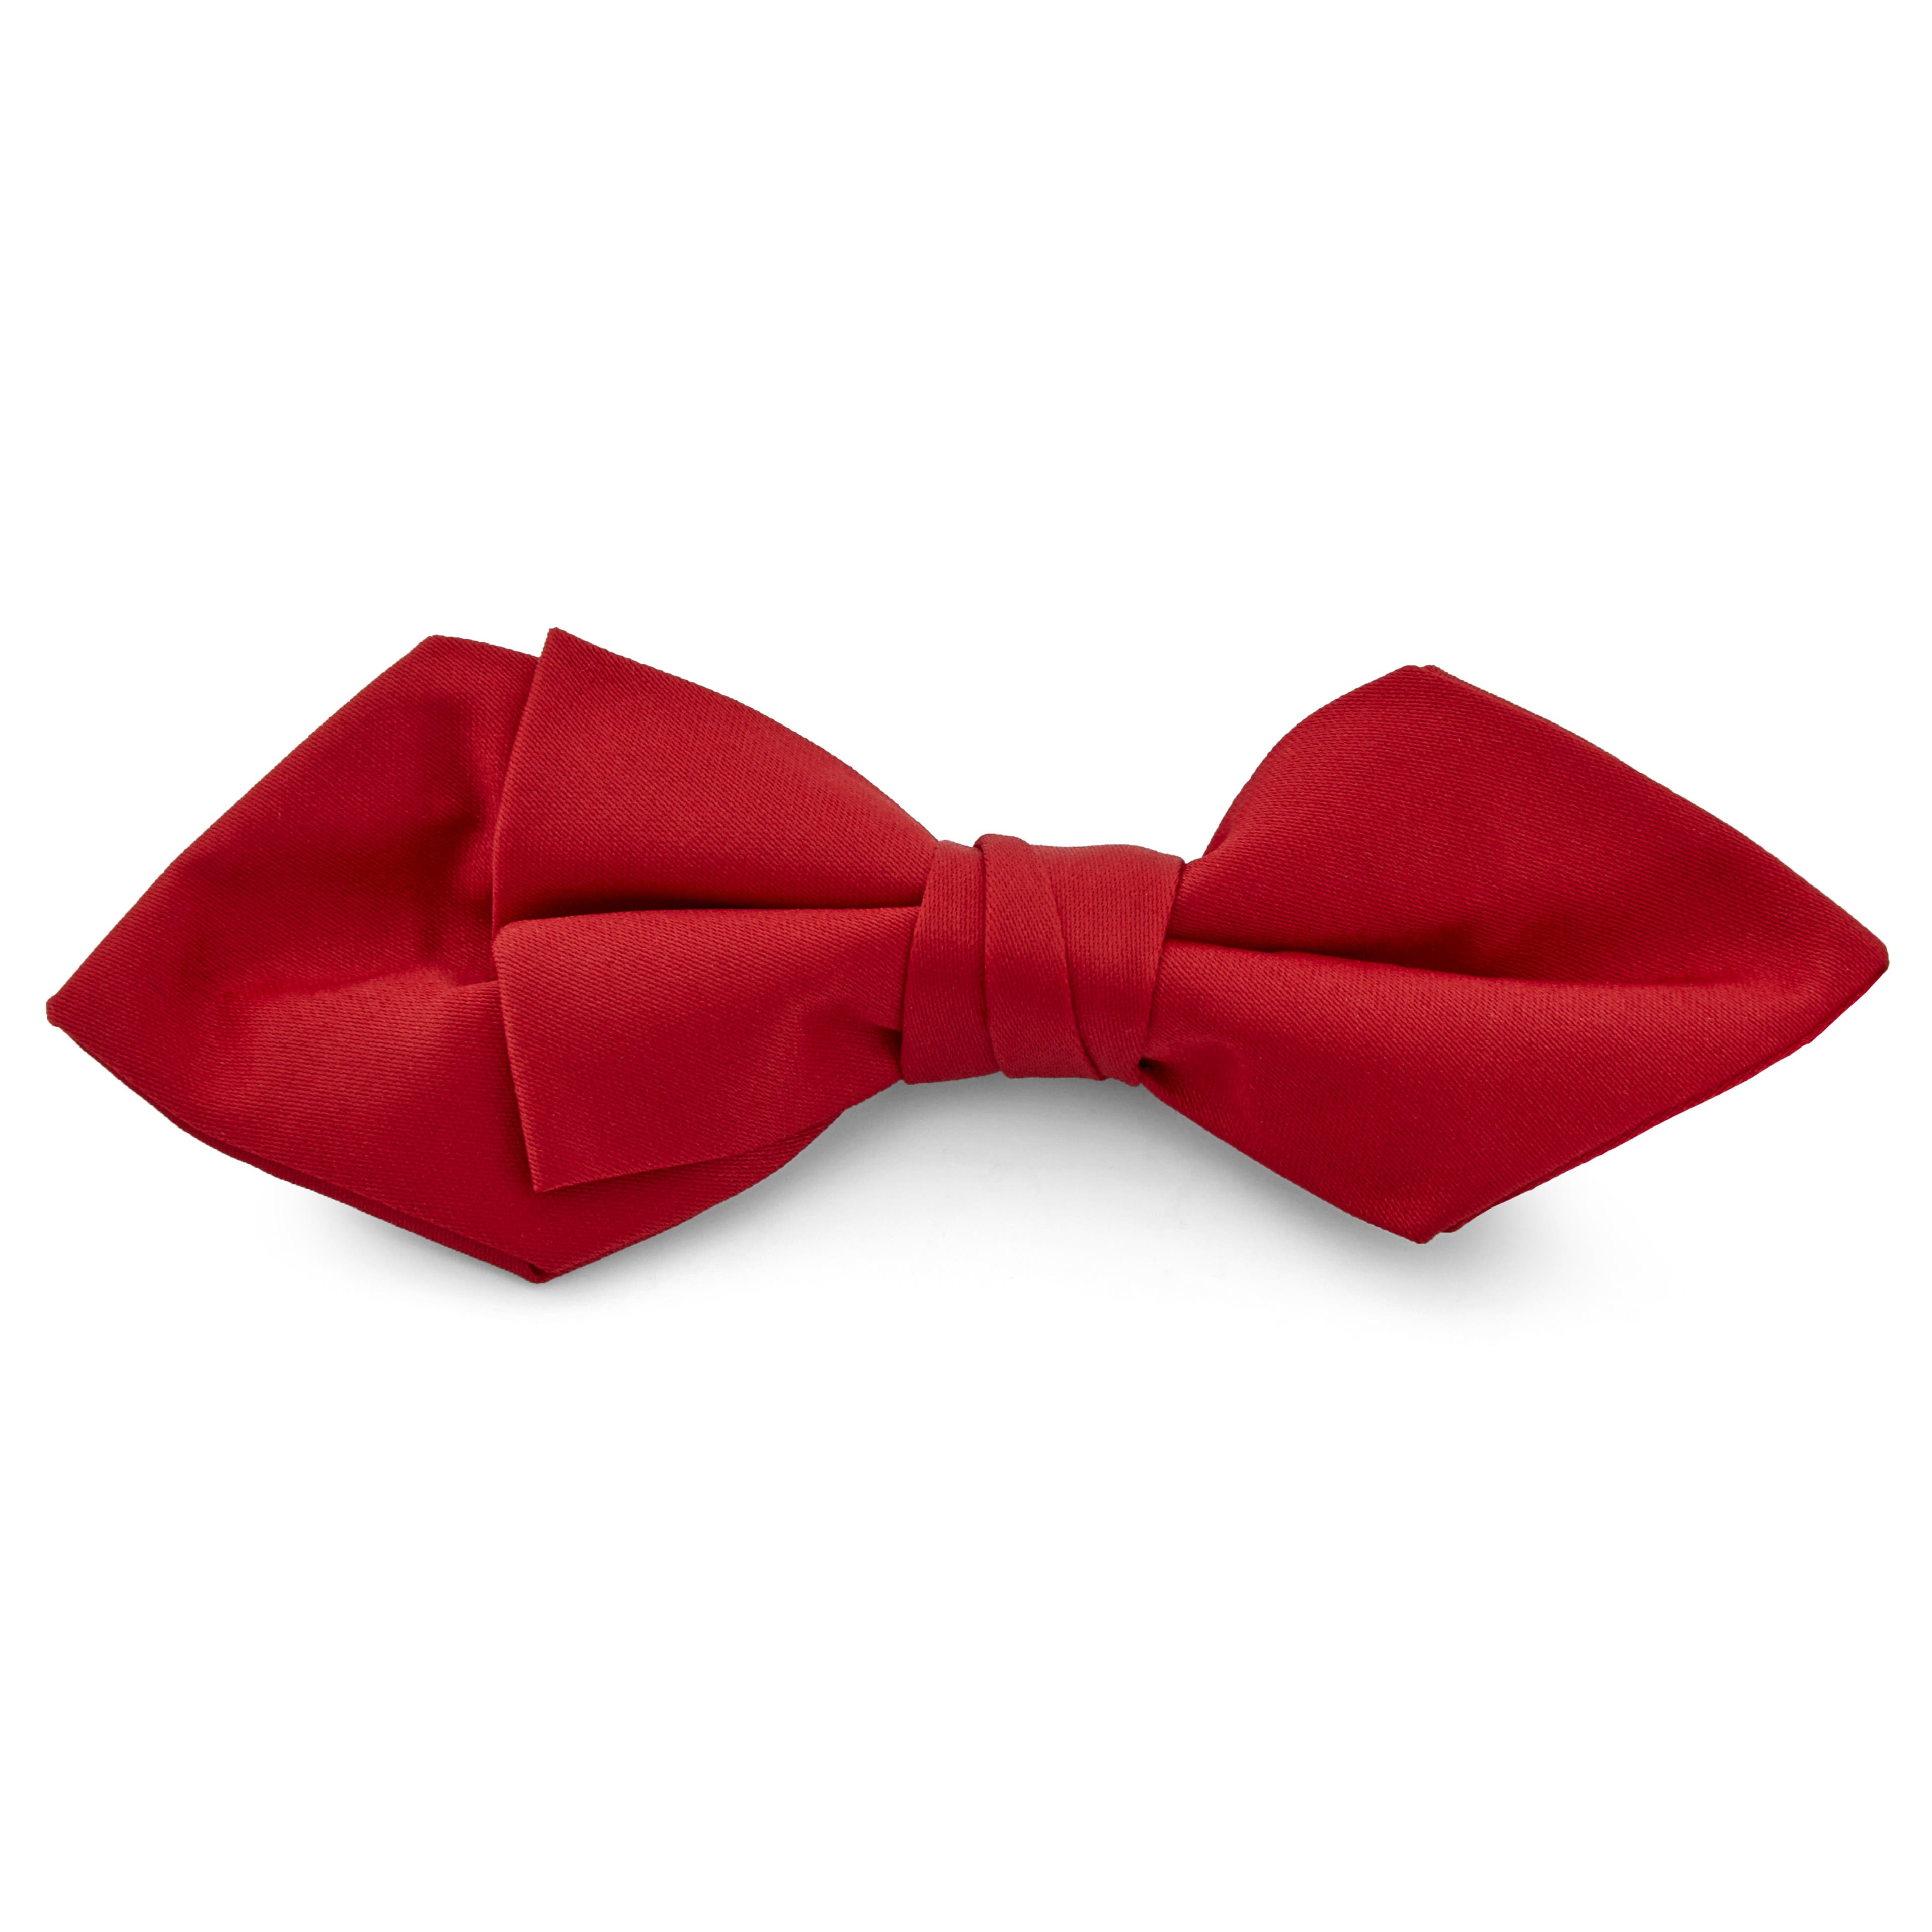 Cherry Red Basic Pointy Pre-Tied Bow Tie